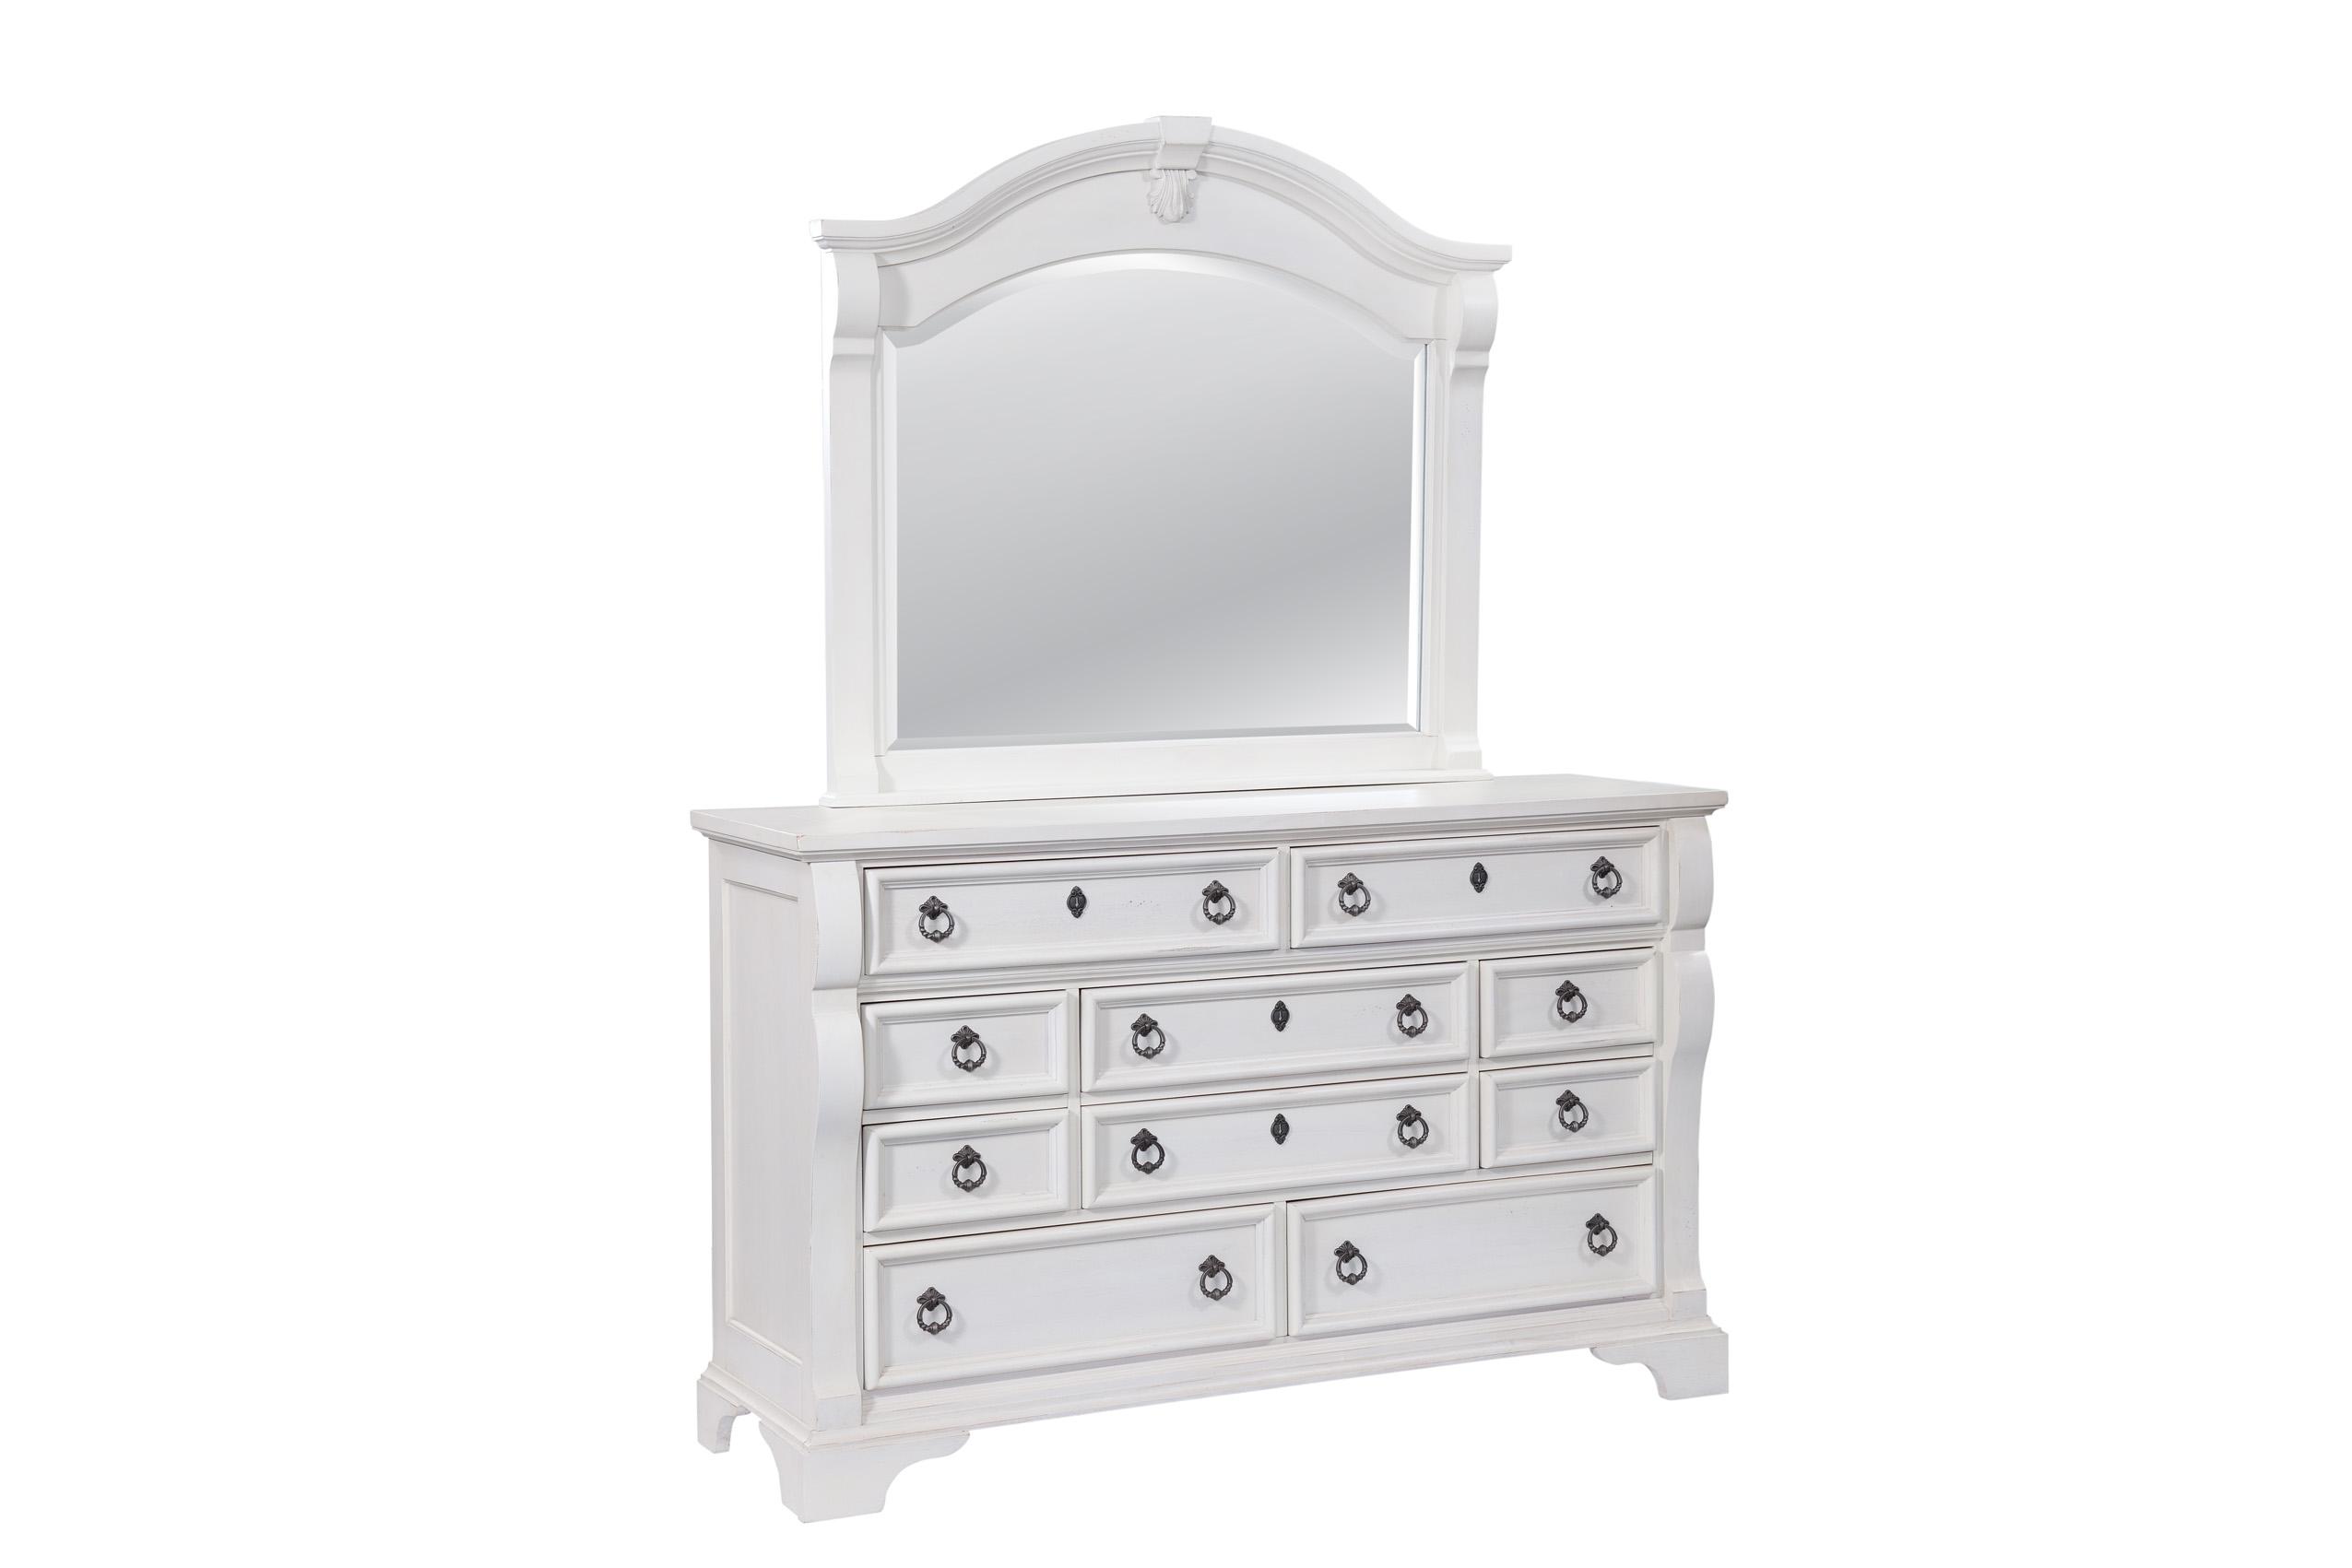 Classic, Traditional, Cottage Dresser With Mirror HEIRLOOM 2910-TDLM 2910-TDLM in White 